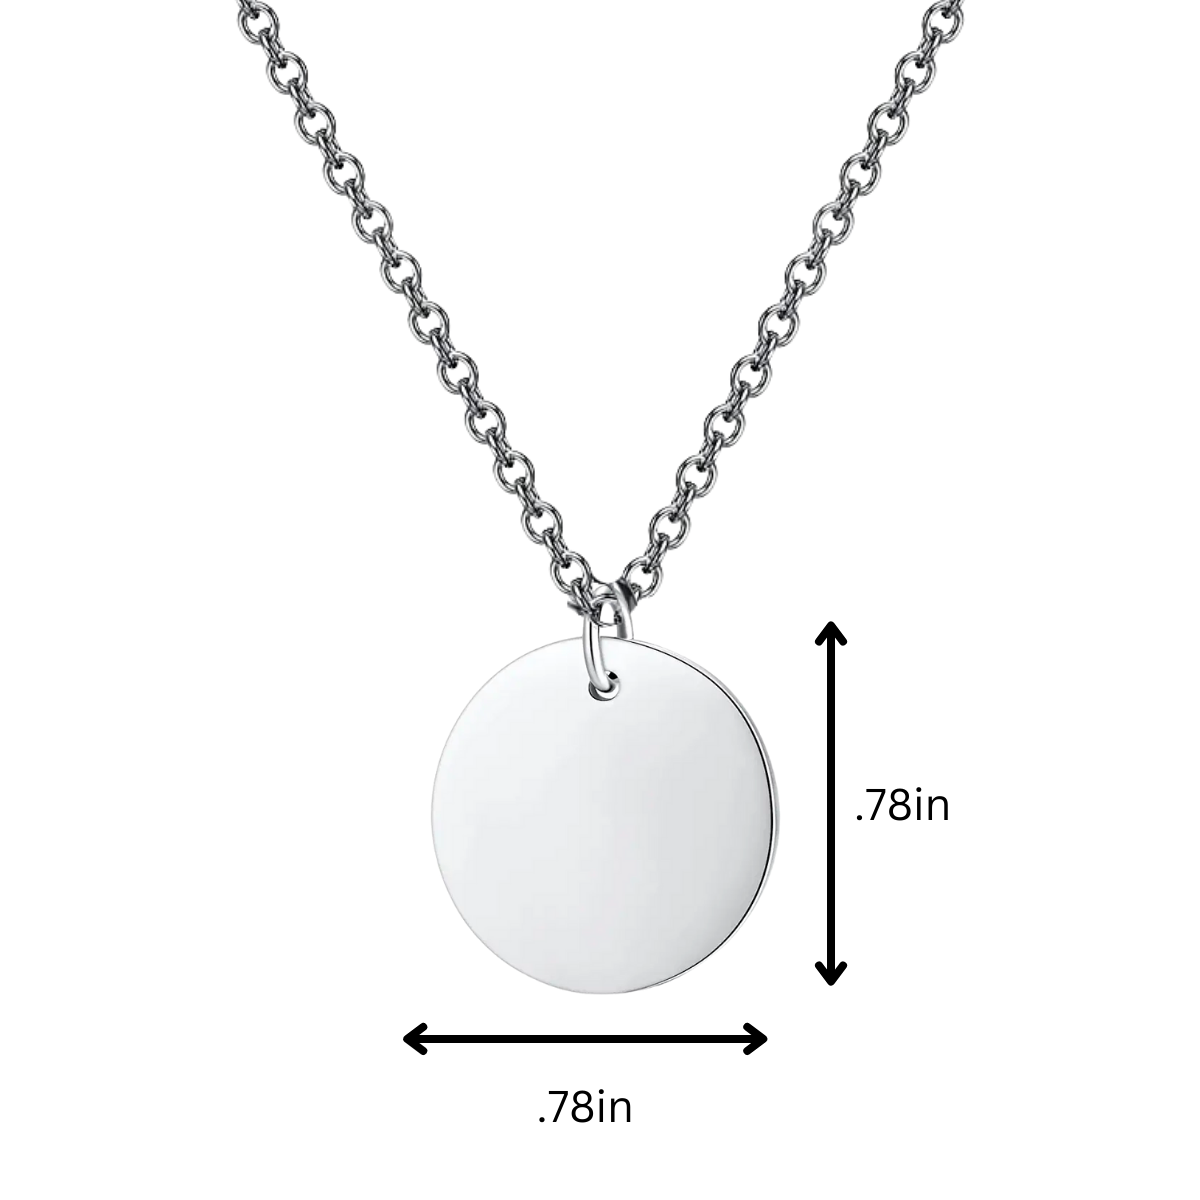 Engraved Volleyball Number Necklace